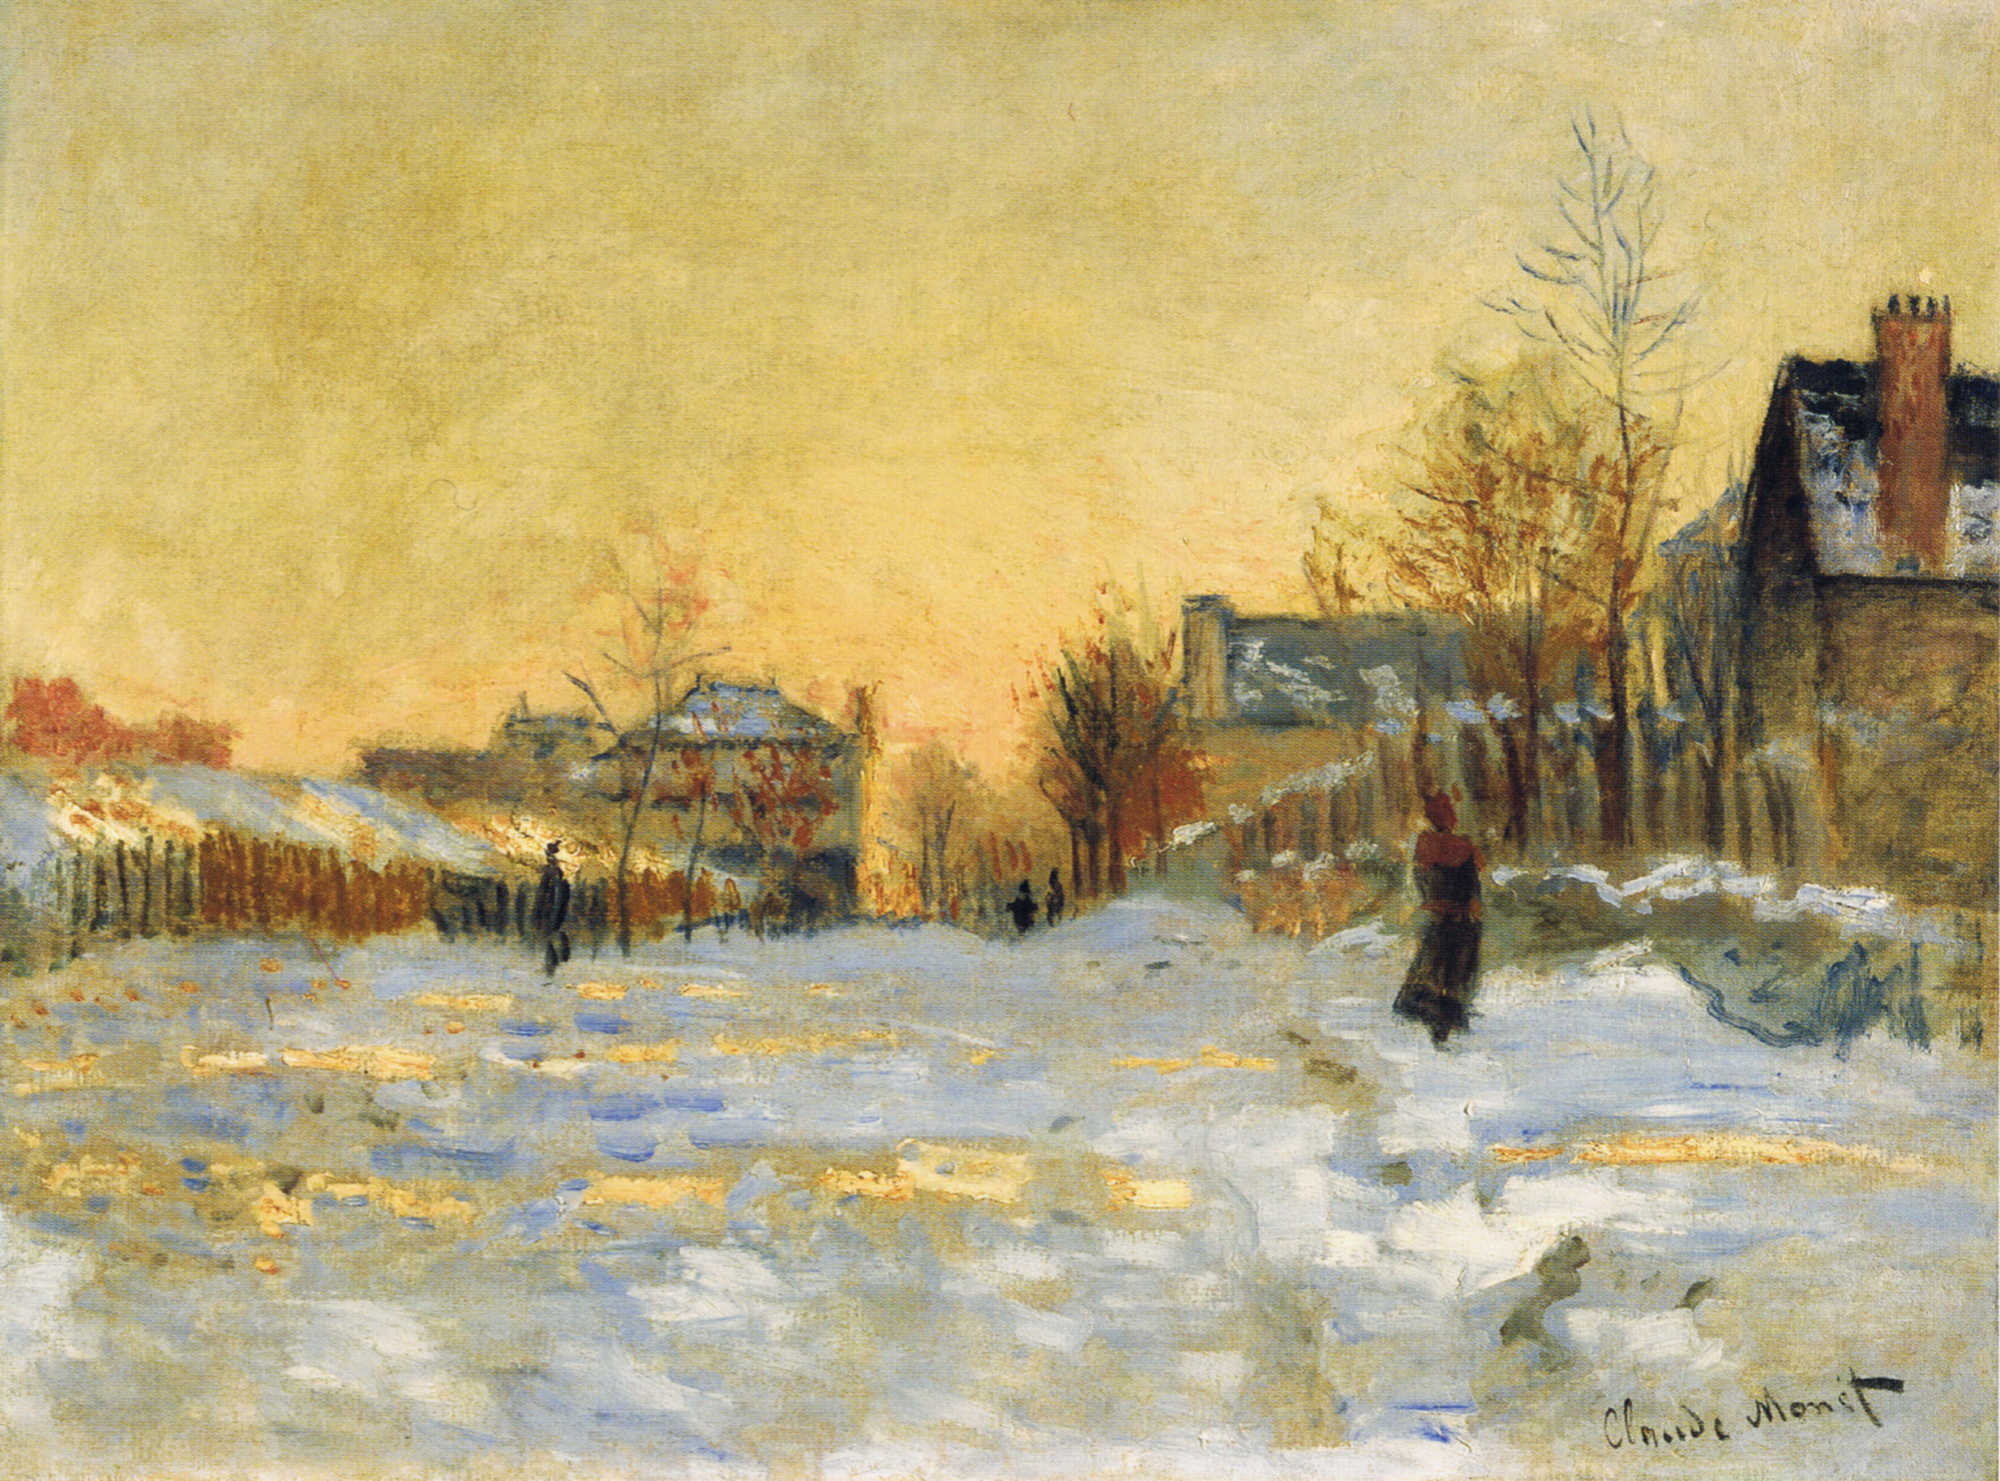 https://uploads0.wikiart.org/images/claude-monet/snow-effect-the-street-in-argentuil.jpg